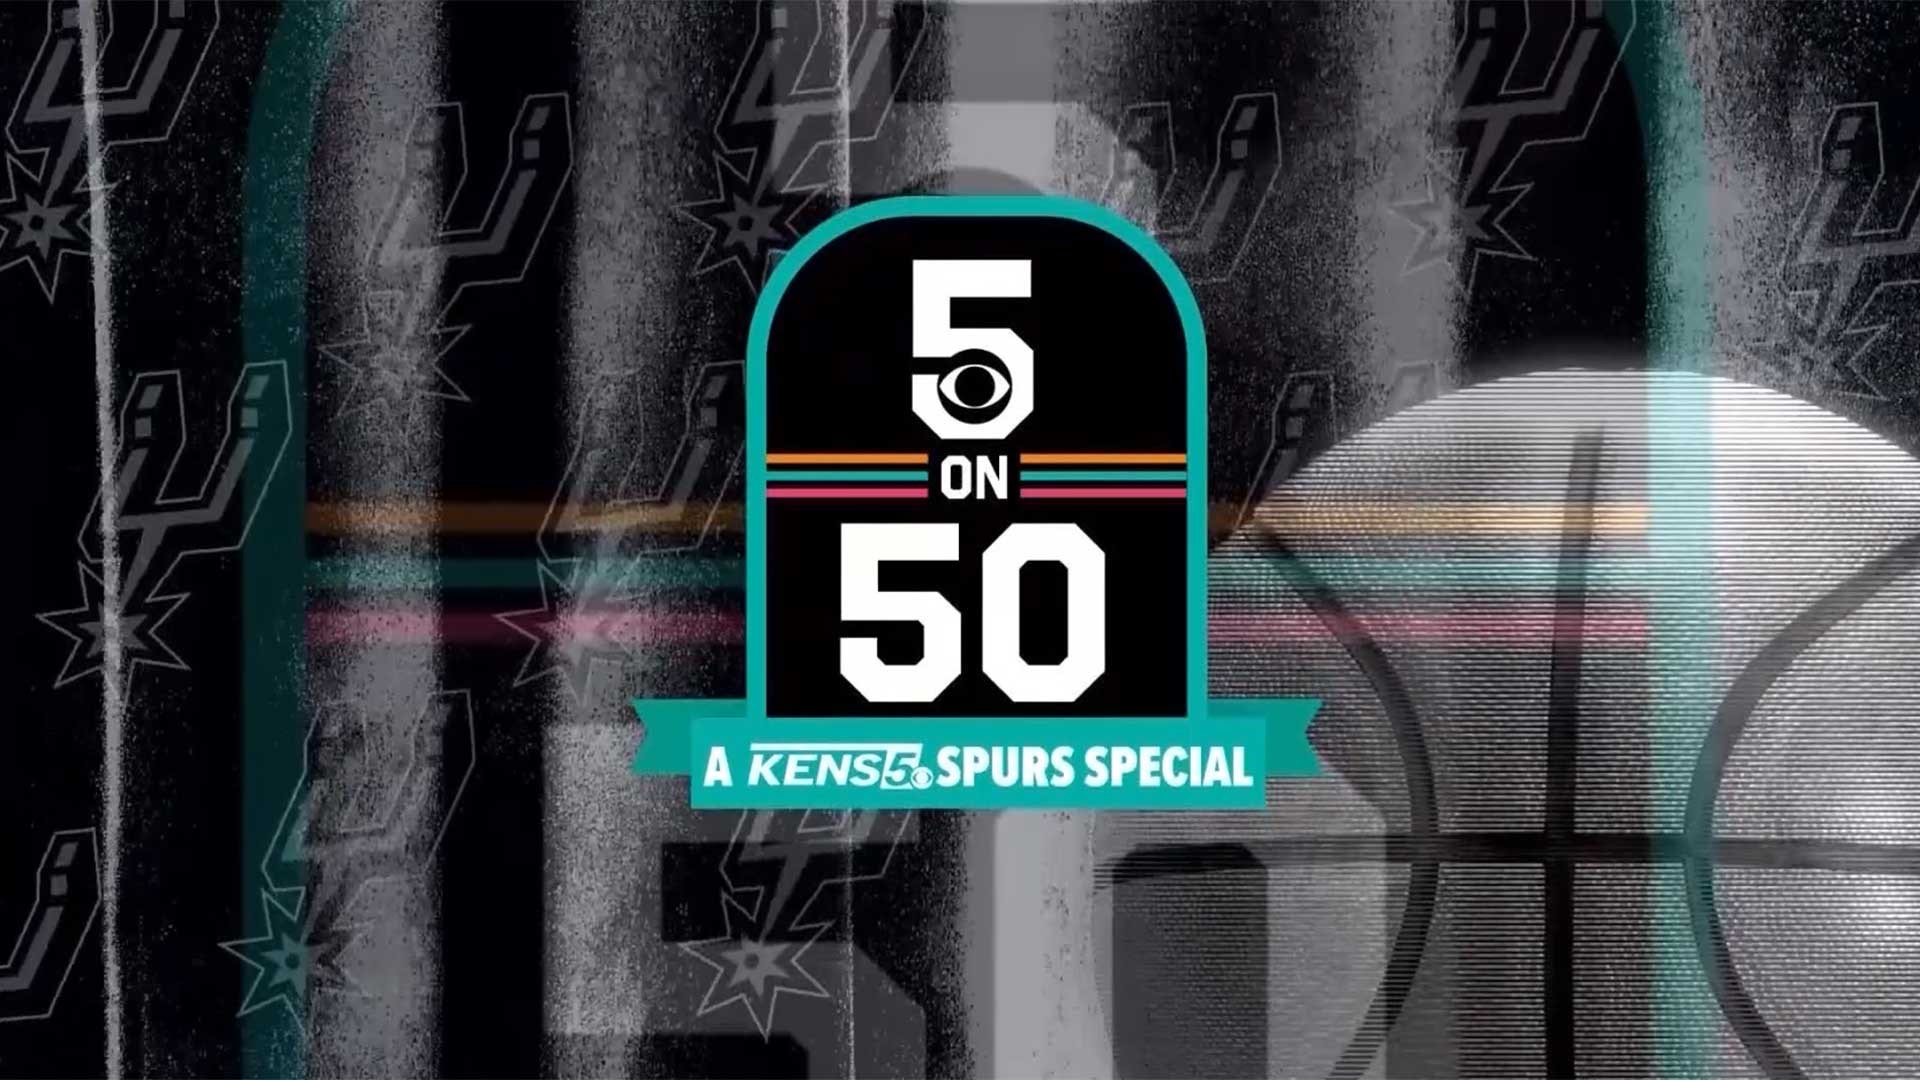 As the Spurs play their 50th season in San Antonio, we're taking a look at the legacy of a team that has brought home five NBA championships.